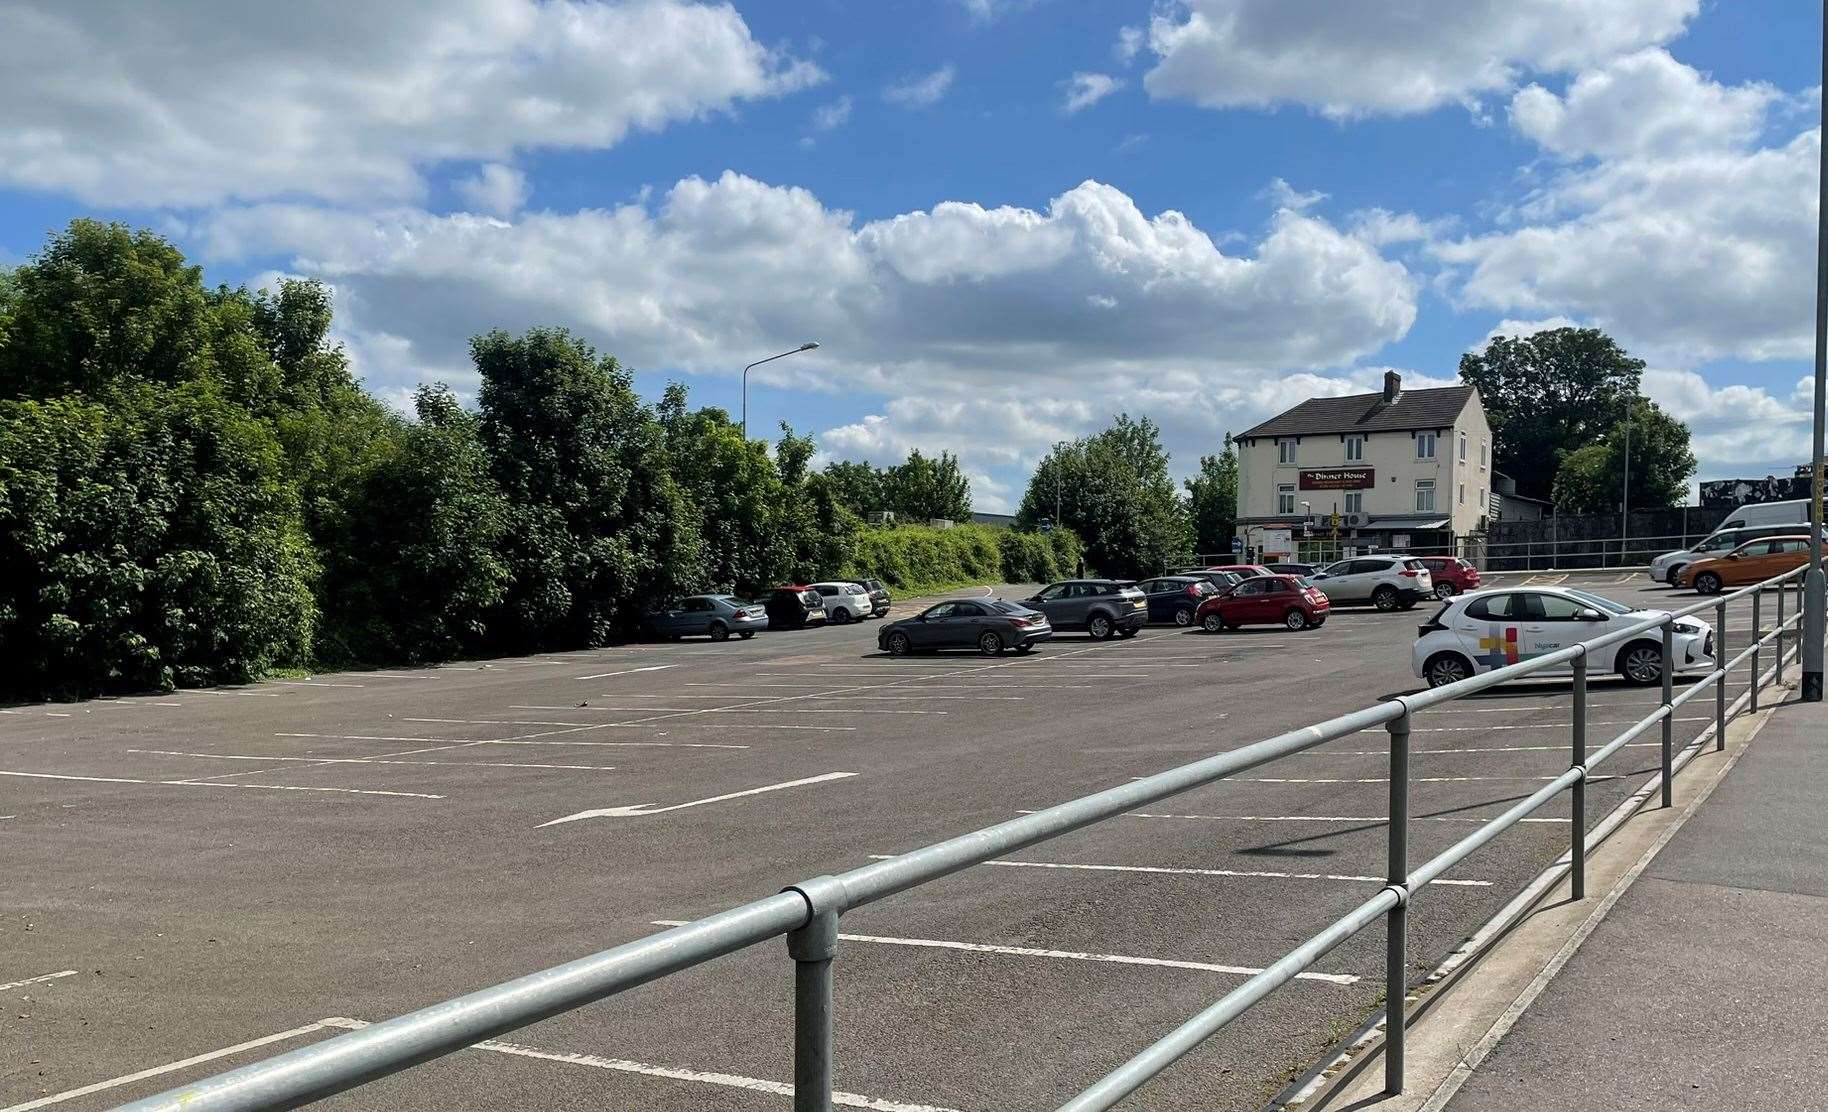 Spring Street car park off of the way system in Sittingbourne town centre is around 150 metres away from the Cockleshell Walk car park. Picture: Joe Crossley